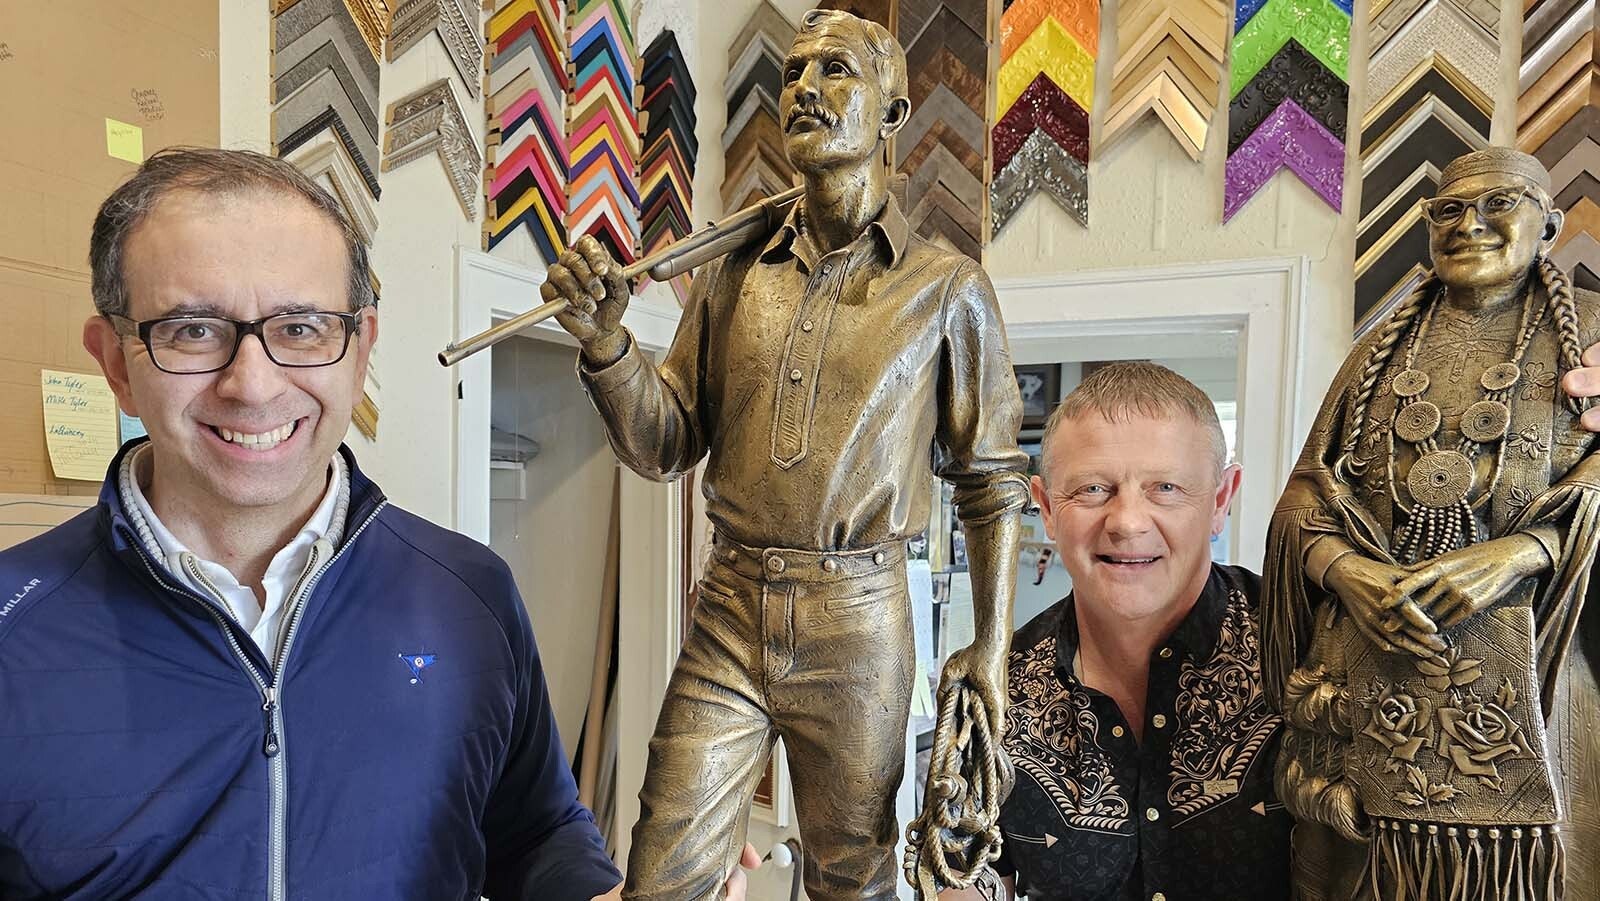 Nathanial Trelease, left, with a statue of Tom Horn, and Harvey Deselms with a statue of Princess Blue Water, right, at Deselms’ studio in Cheyenne. The two statues are the next bronzes that will be installed as part of Cheyenne's bronze project, which has 62 statues in it and counting.